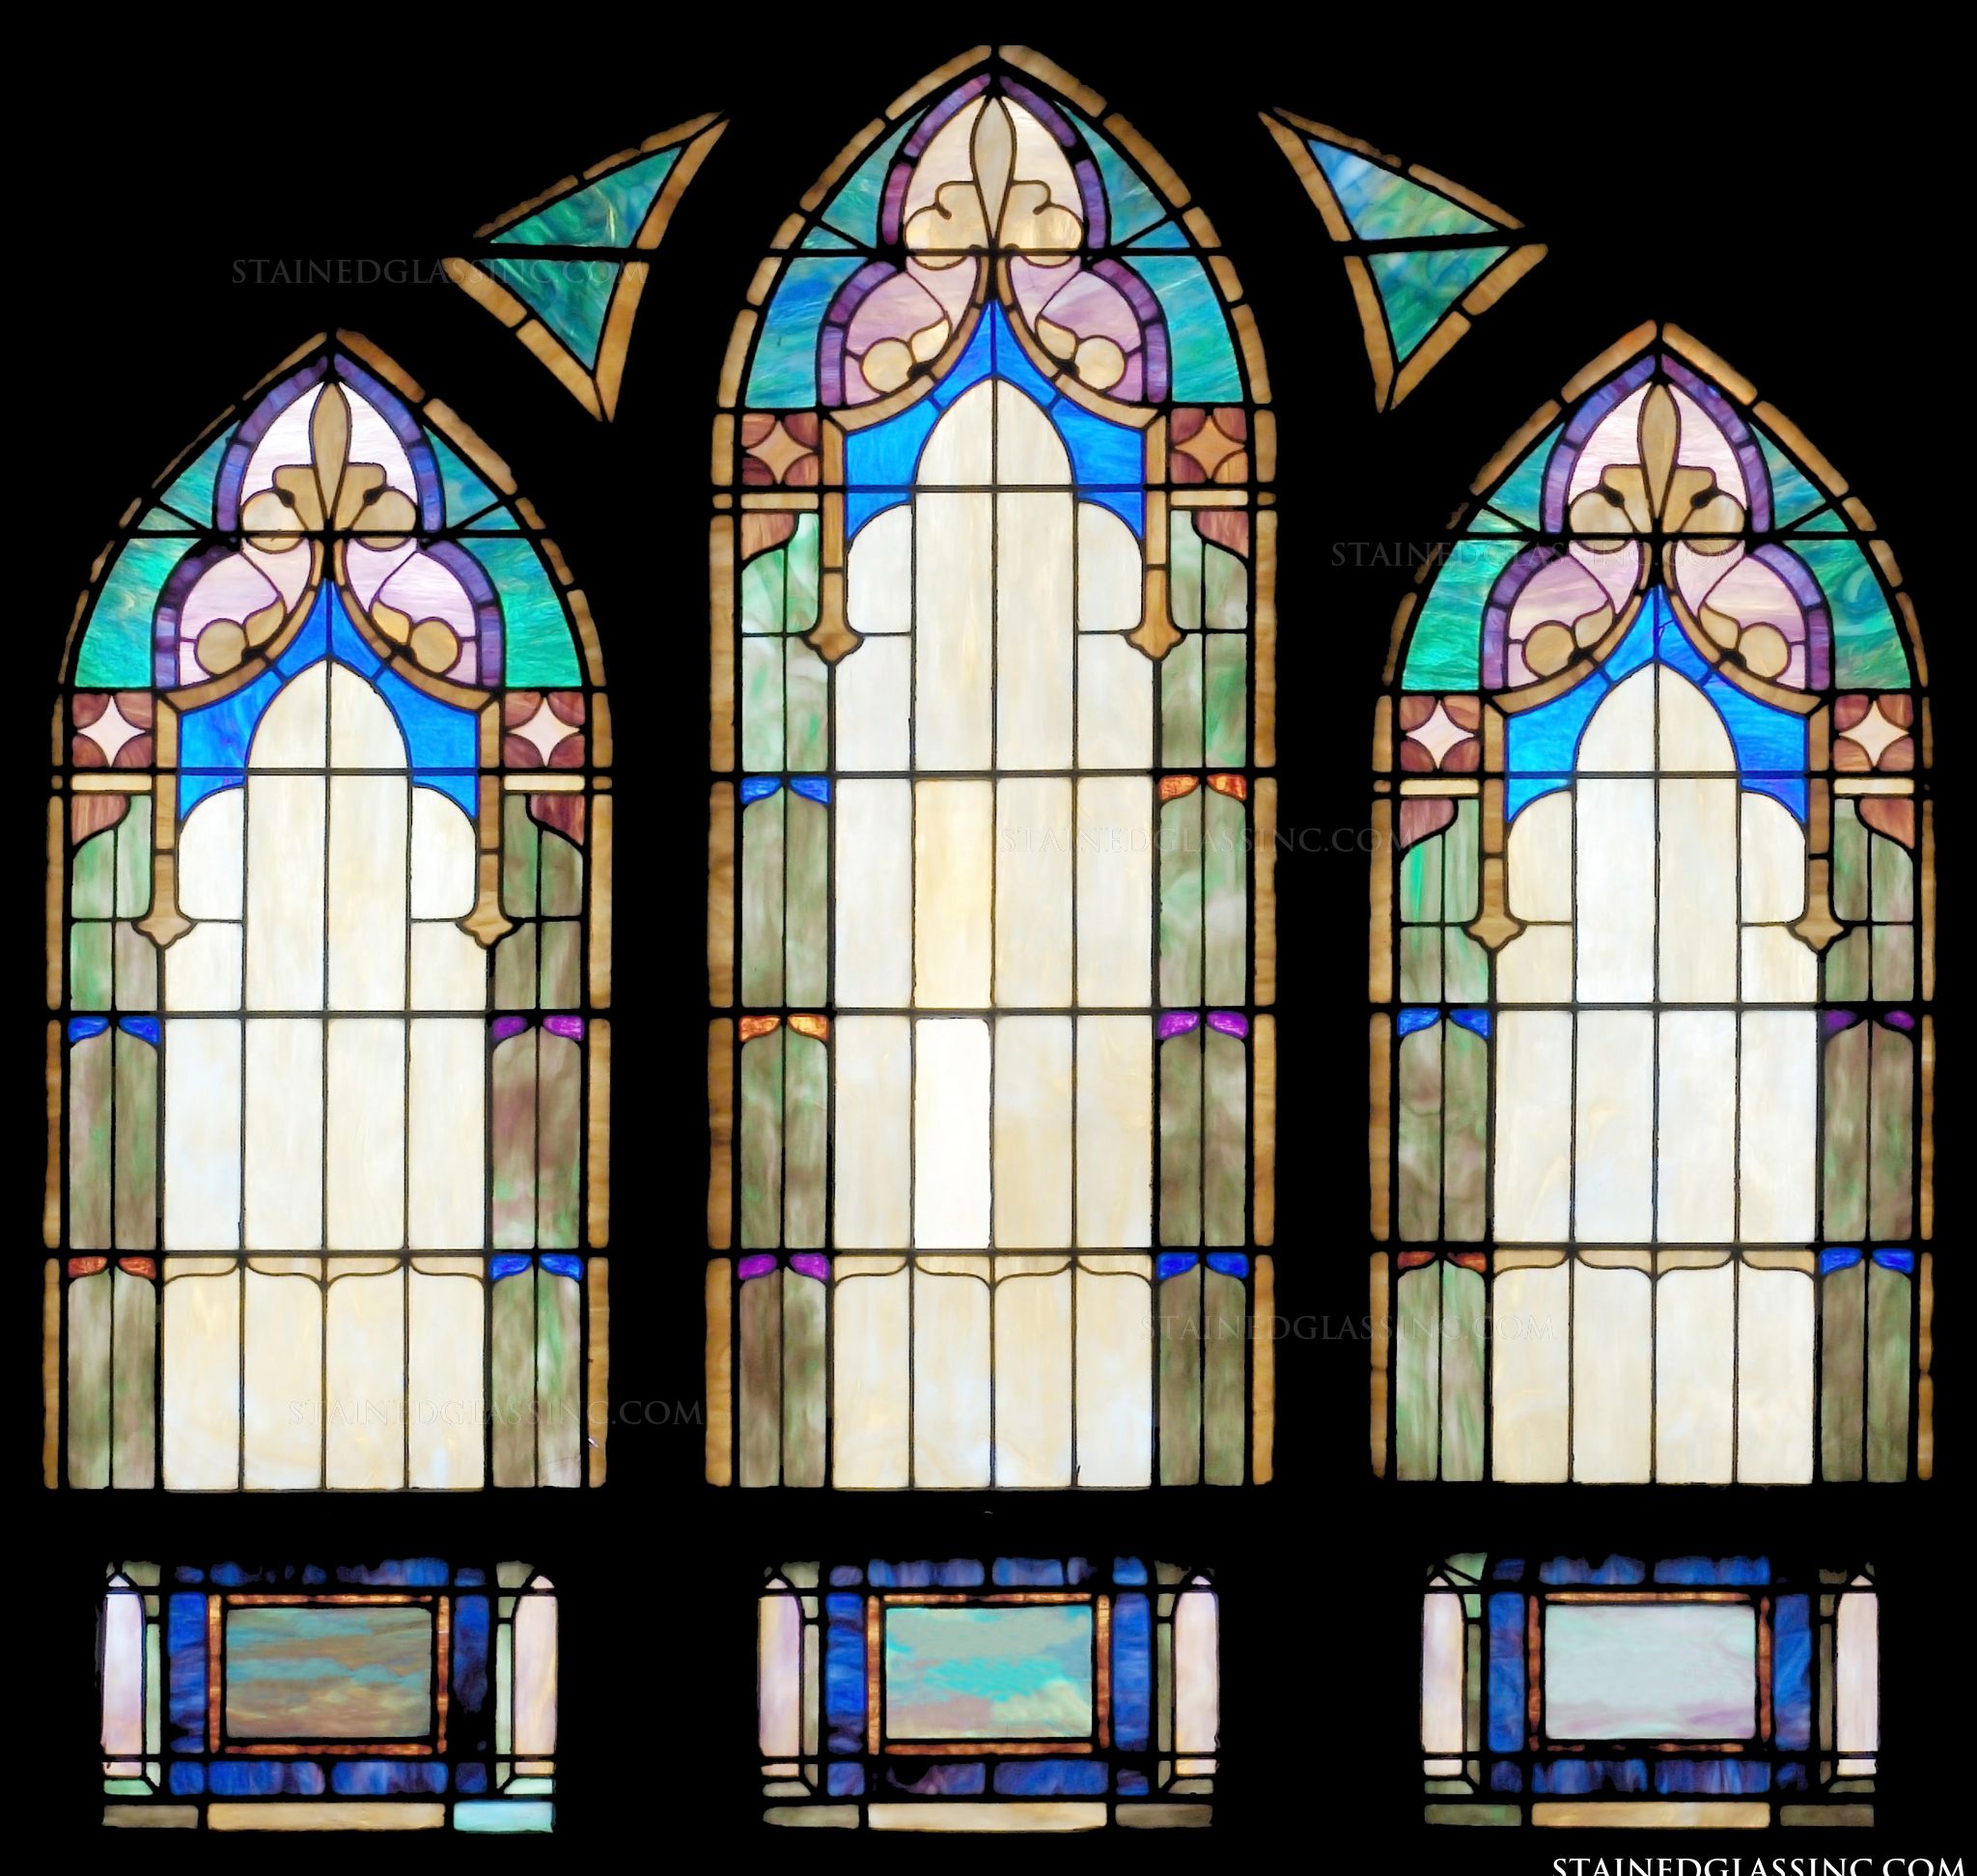 "Arched Set" Stained Glass Window